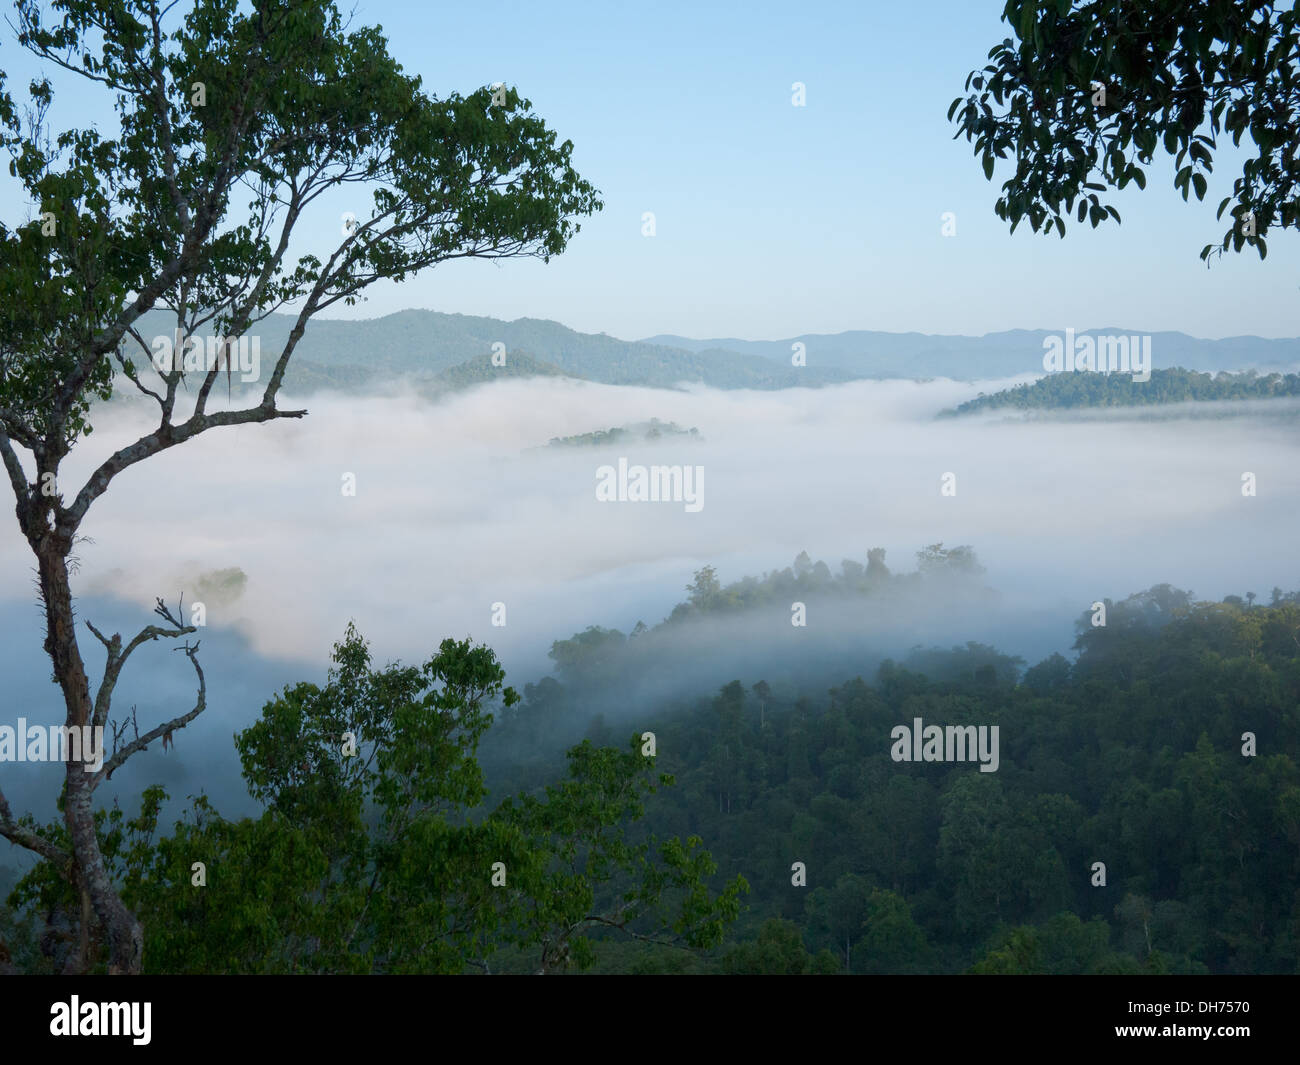 The misty, foggy rainforest in Nature Reserve as seen from a at The Gibbon Experience near Huay Xai, Laos Stock Photo - Alamy